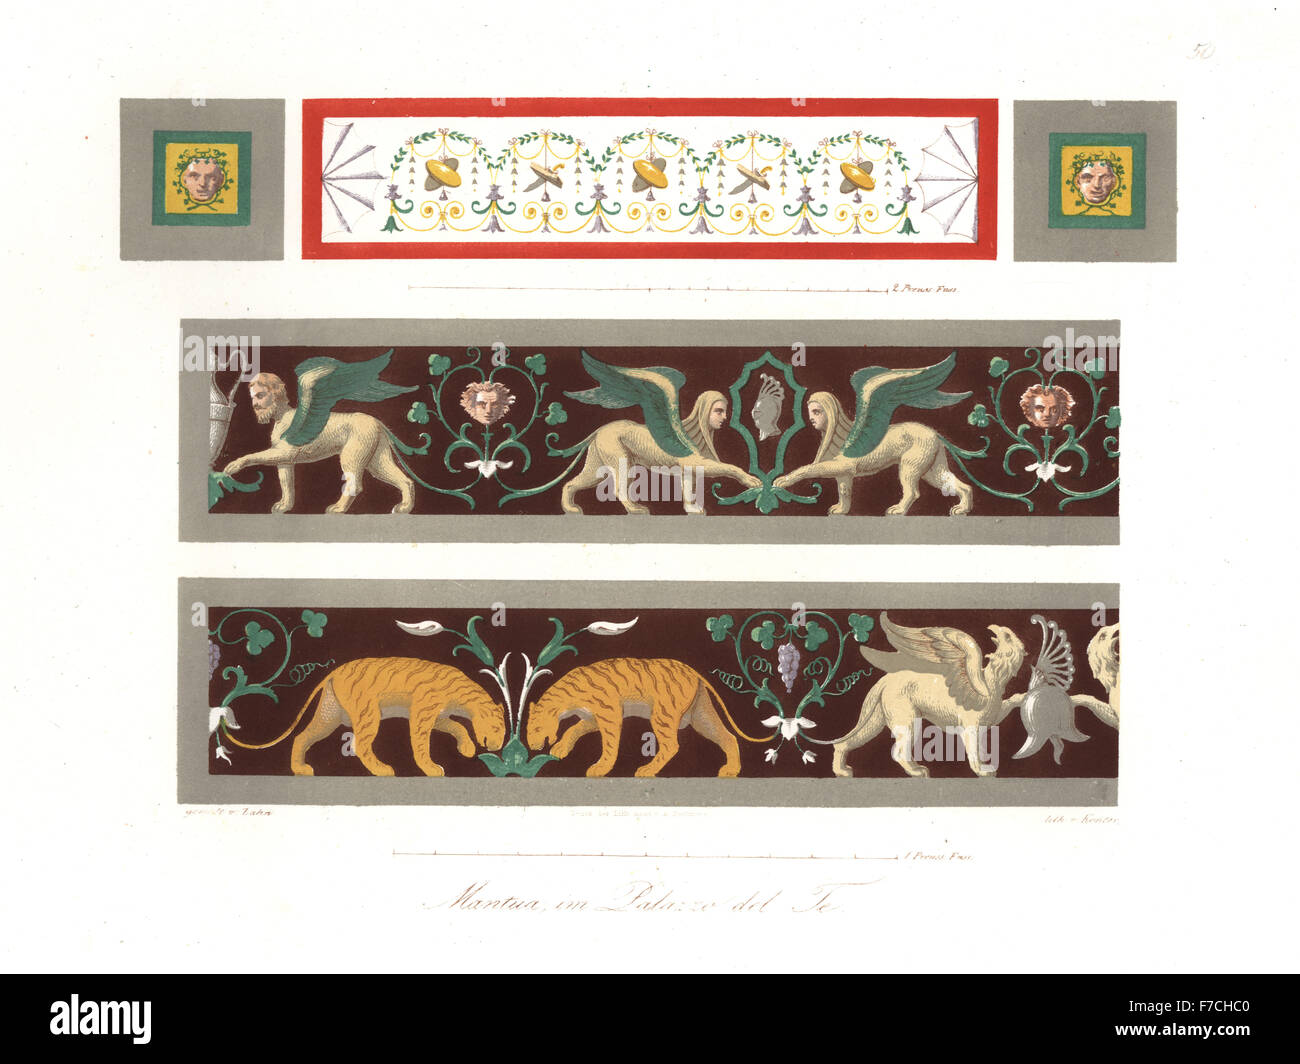 Wall paintings of monsters, masks, tigers, winged creatures and chimera from the Palazzo del Te, Mantua. Handcoloured lithograph by Konter after an illustration by Wilhelm Zahn from his Ornament of All Classical Art Eras, Ornamente aller klassischen Kunst-Epochen, Reimer, Berlin, 1834. Stock Photo